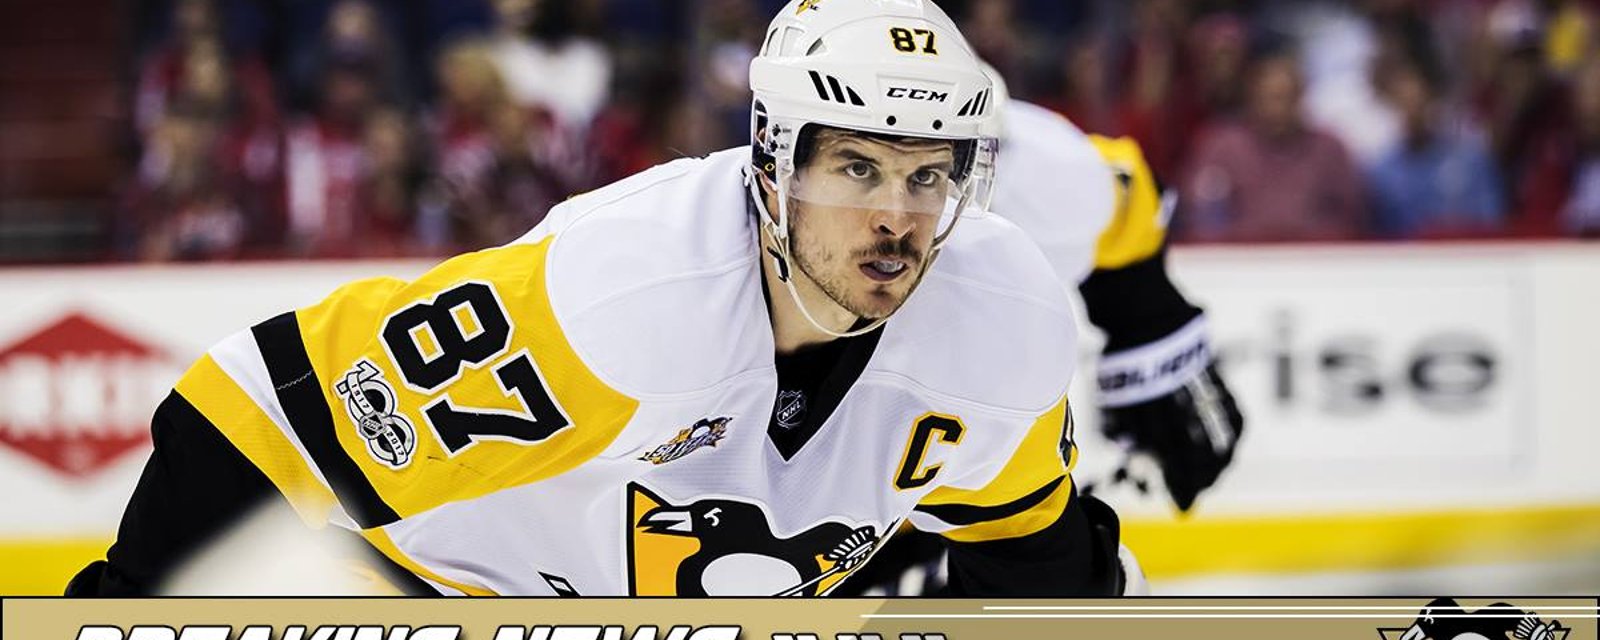 Breaking: Sidney Crosby responds to “concussion” talk after Game 6.